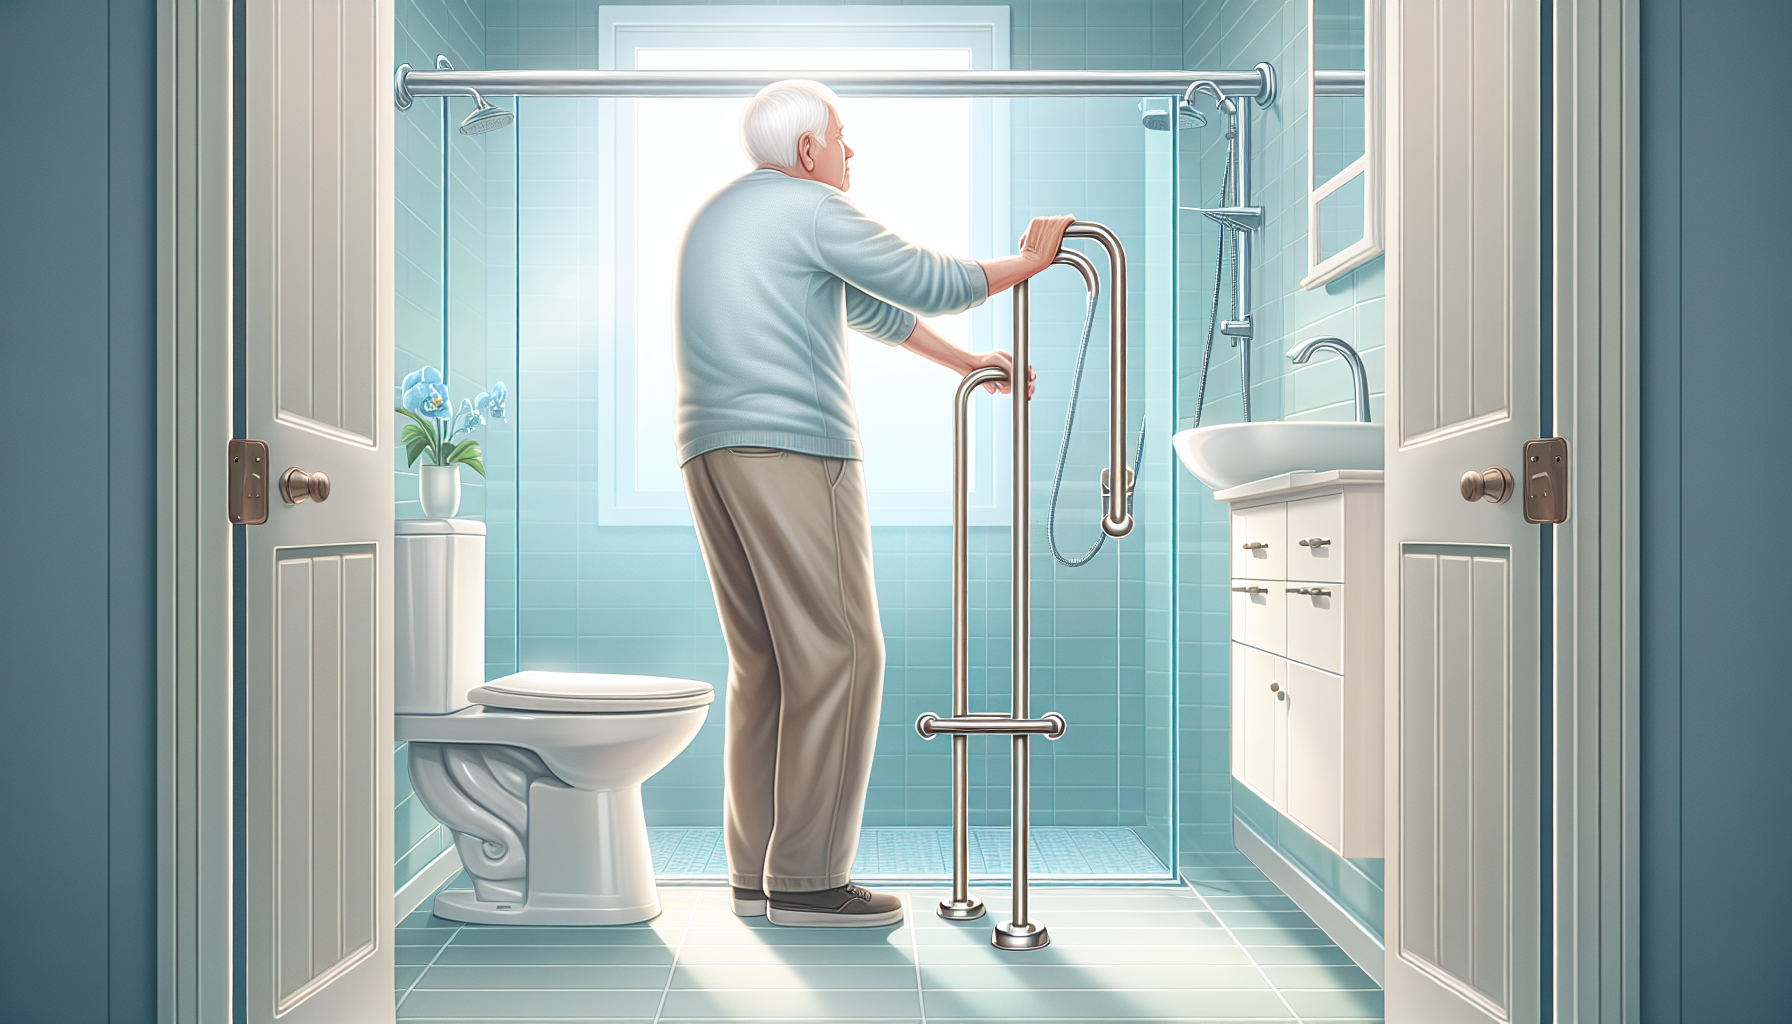 Illustration of a senior using grab bars for stability in the bathroom